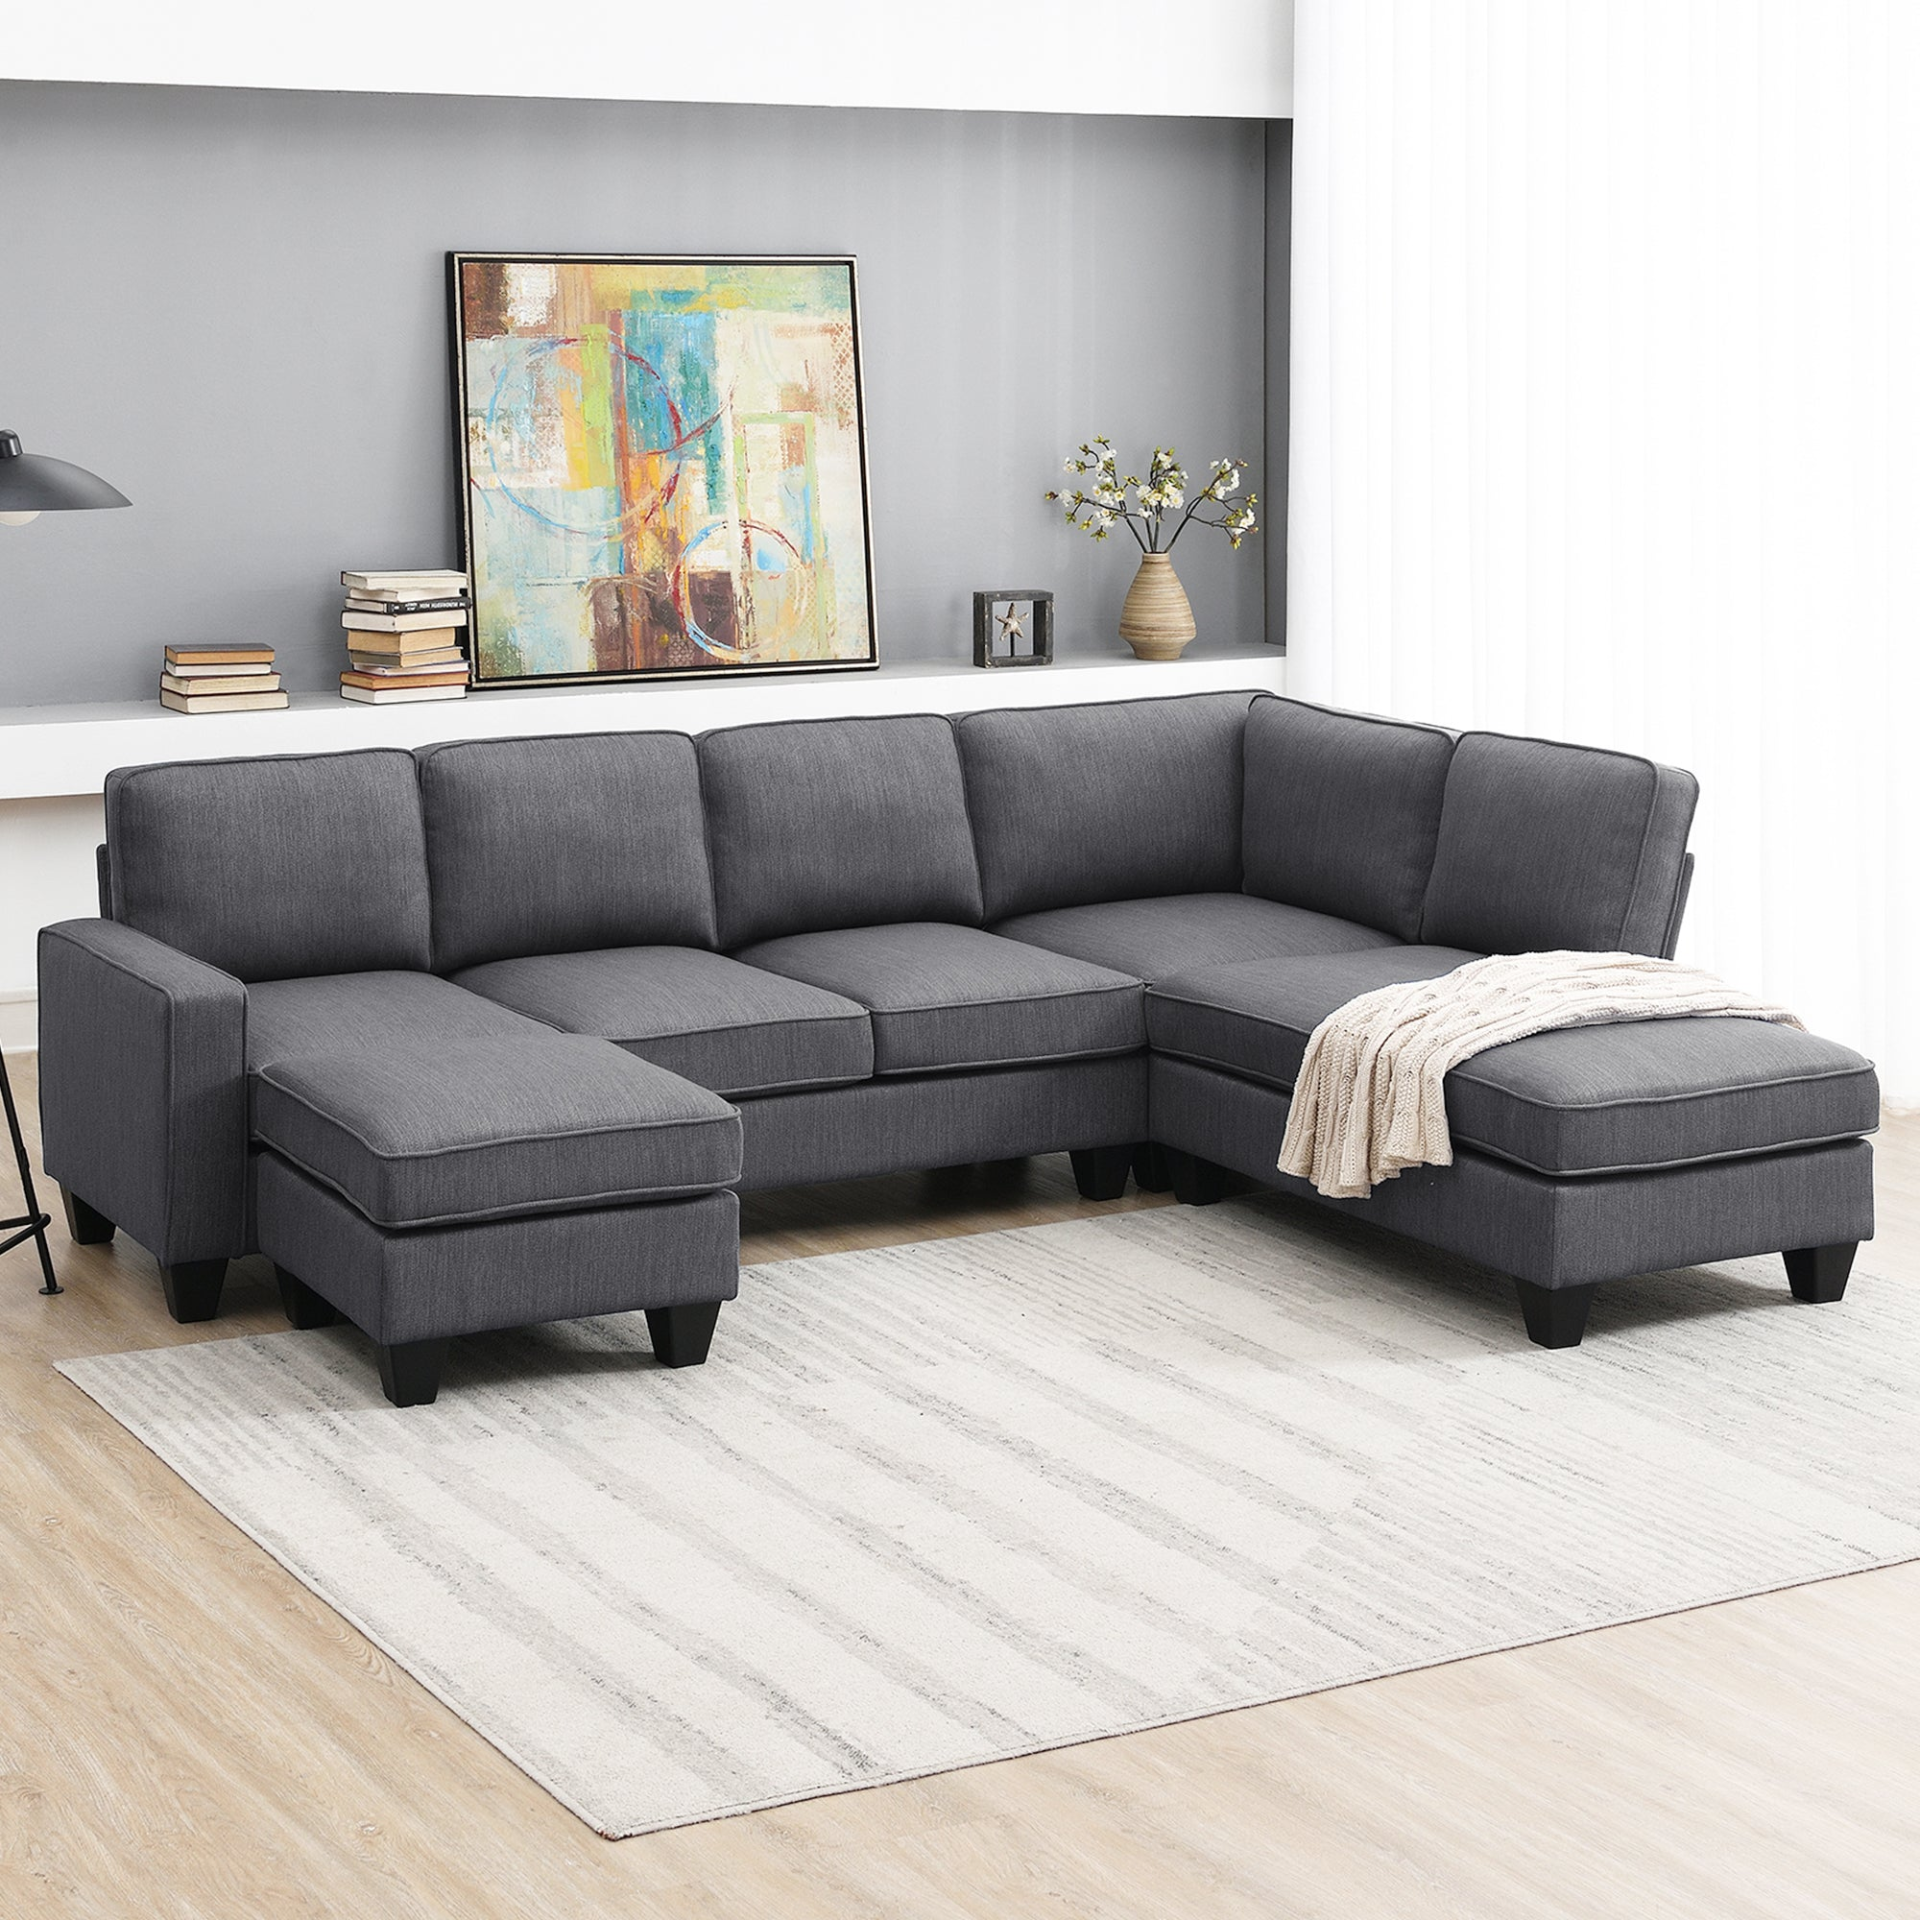 Dark Grey - Plush L-Shape 7-Seat Sectional Sofa with Chaise Lounge and Convertible Ottoman (104"x79")